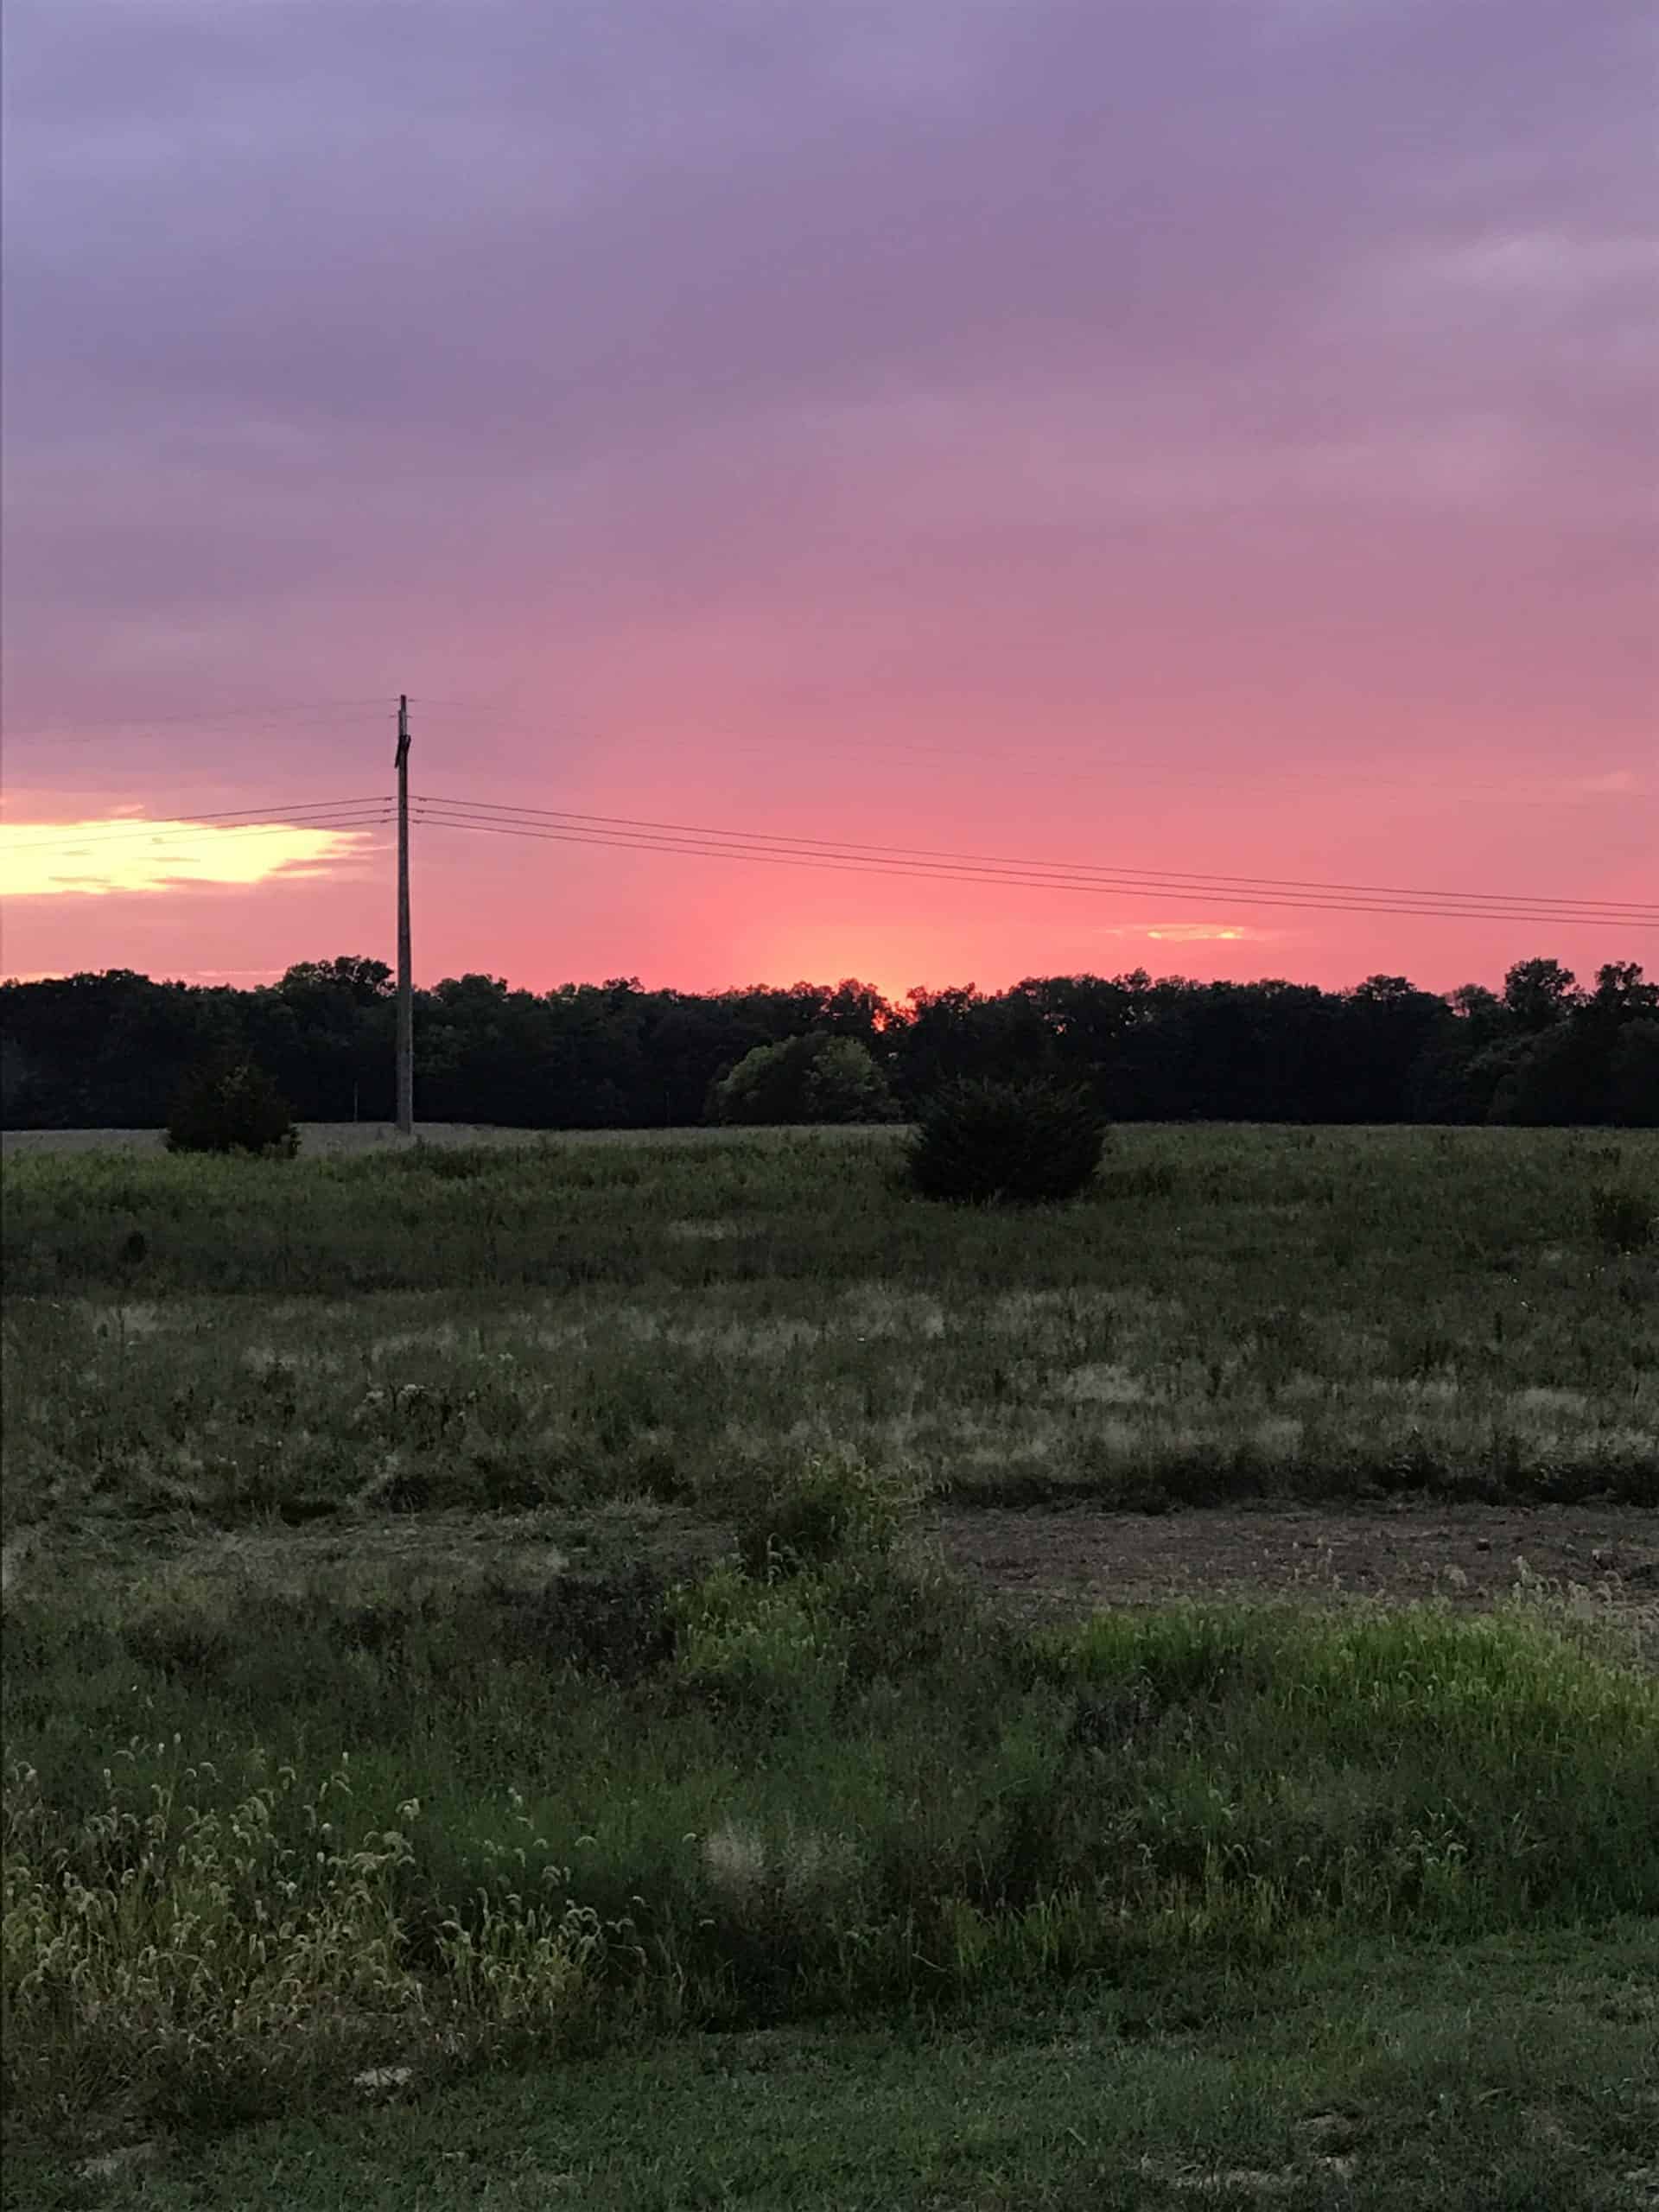 Another gorgeous sunset view at my favorite homestead!